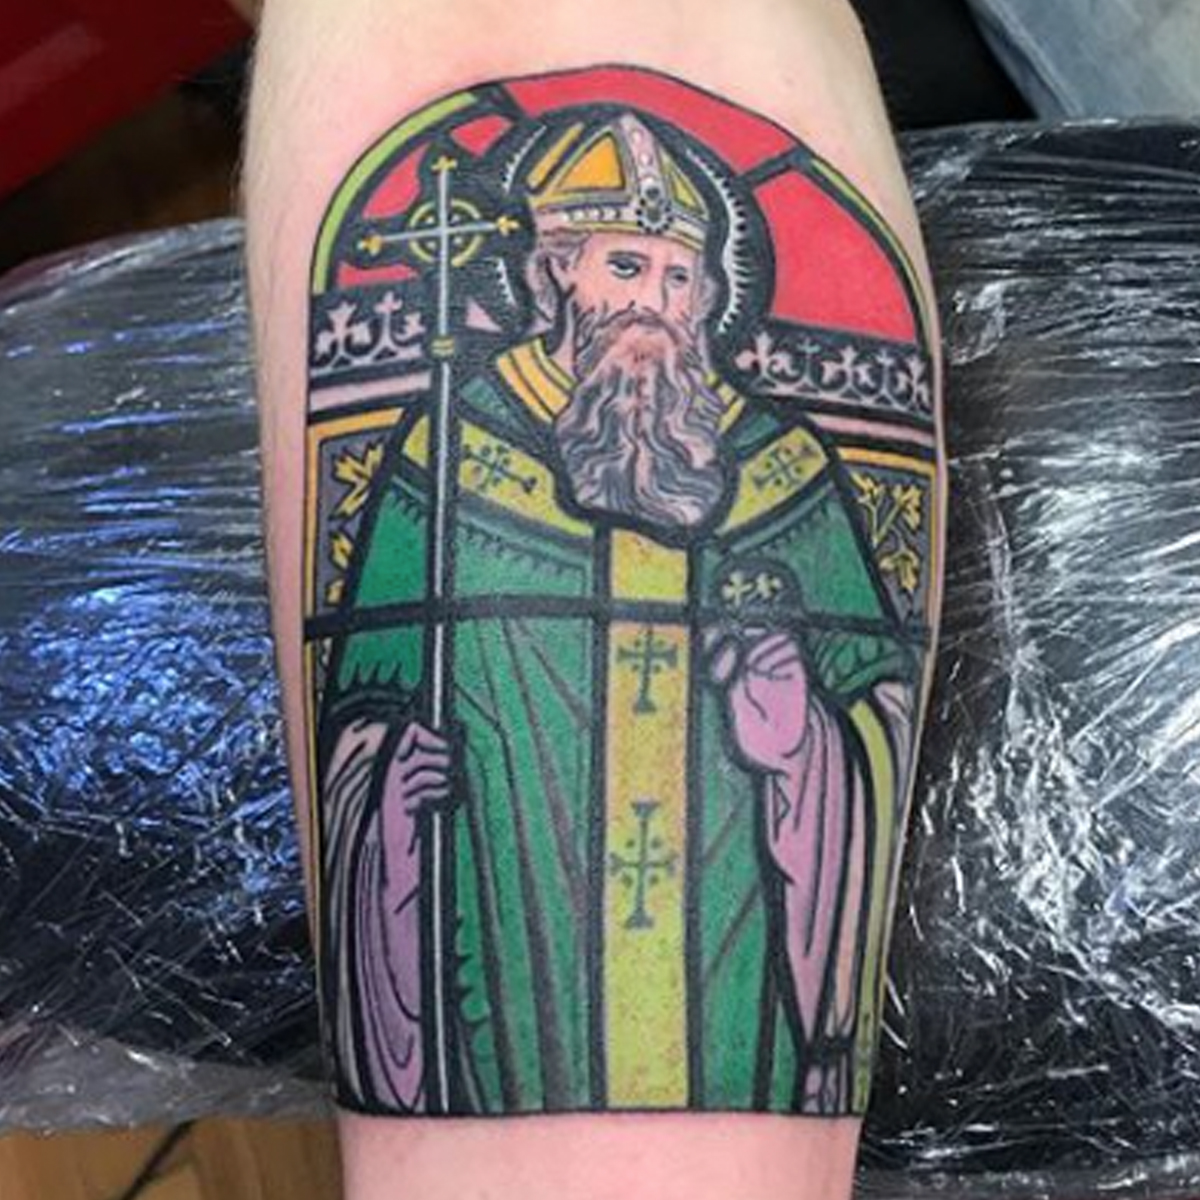 Get inked on St Patricks Day in Bushwick with free flash sheet tats